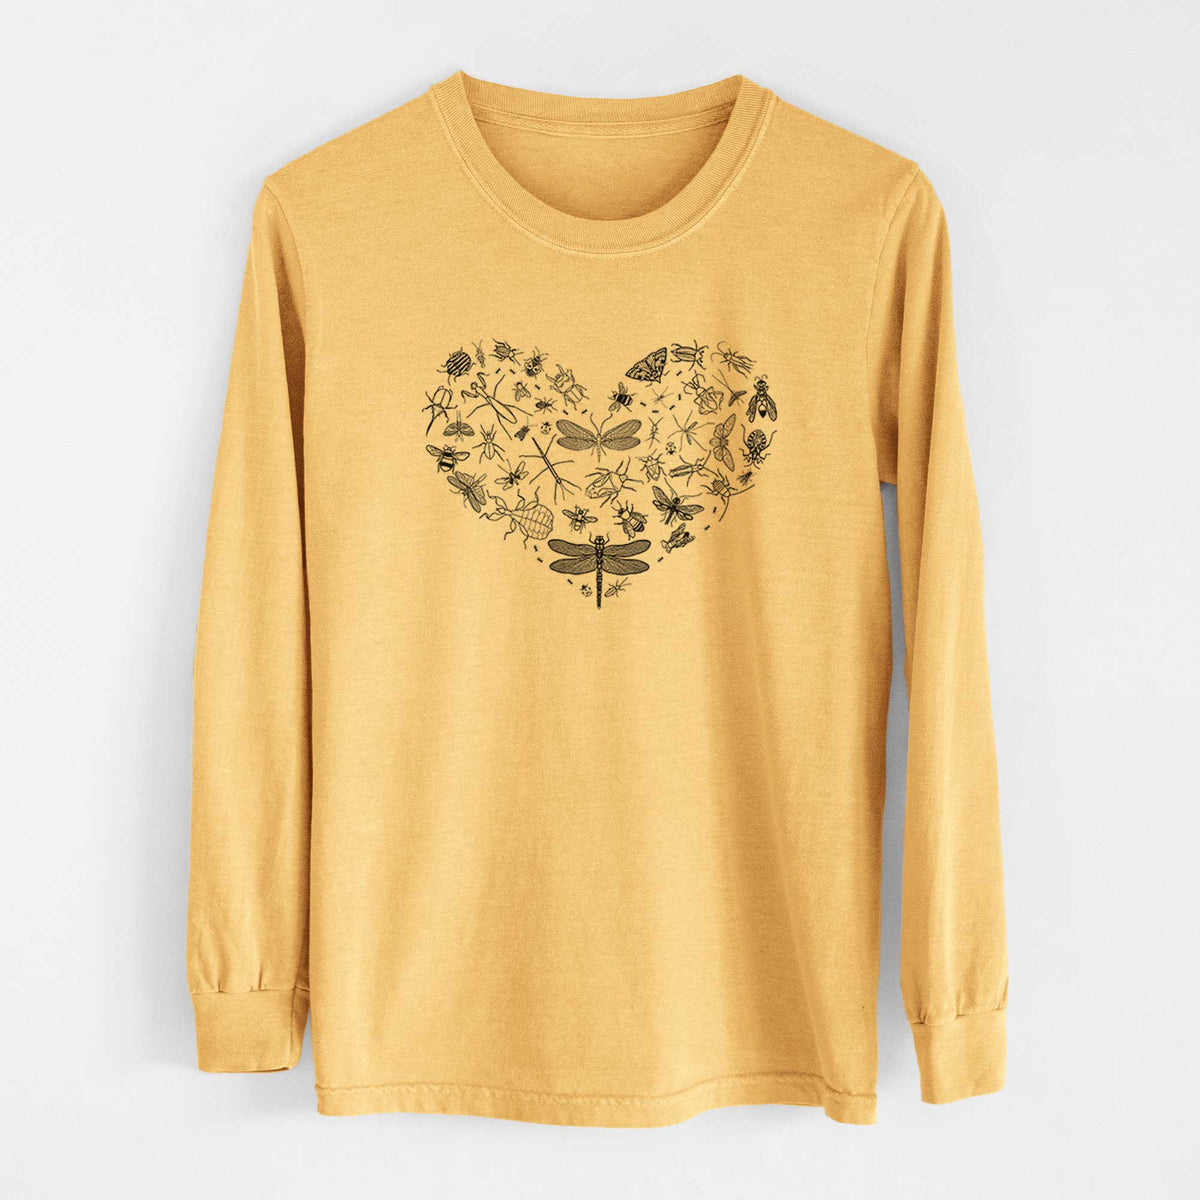 Heart Full of Insects - Heavyweight 100% Cotton Long Sleeve